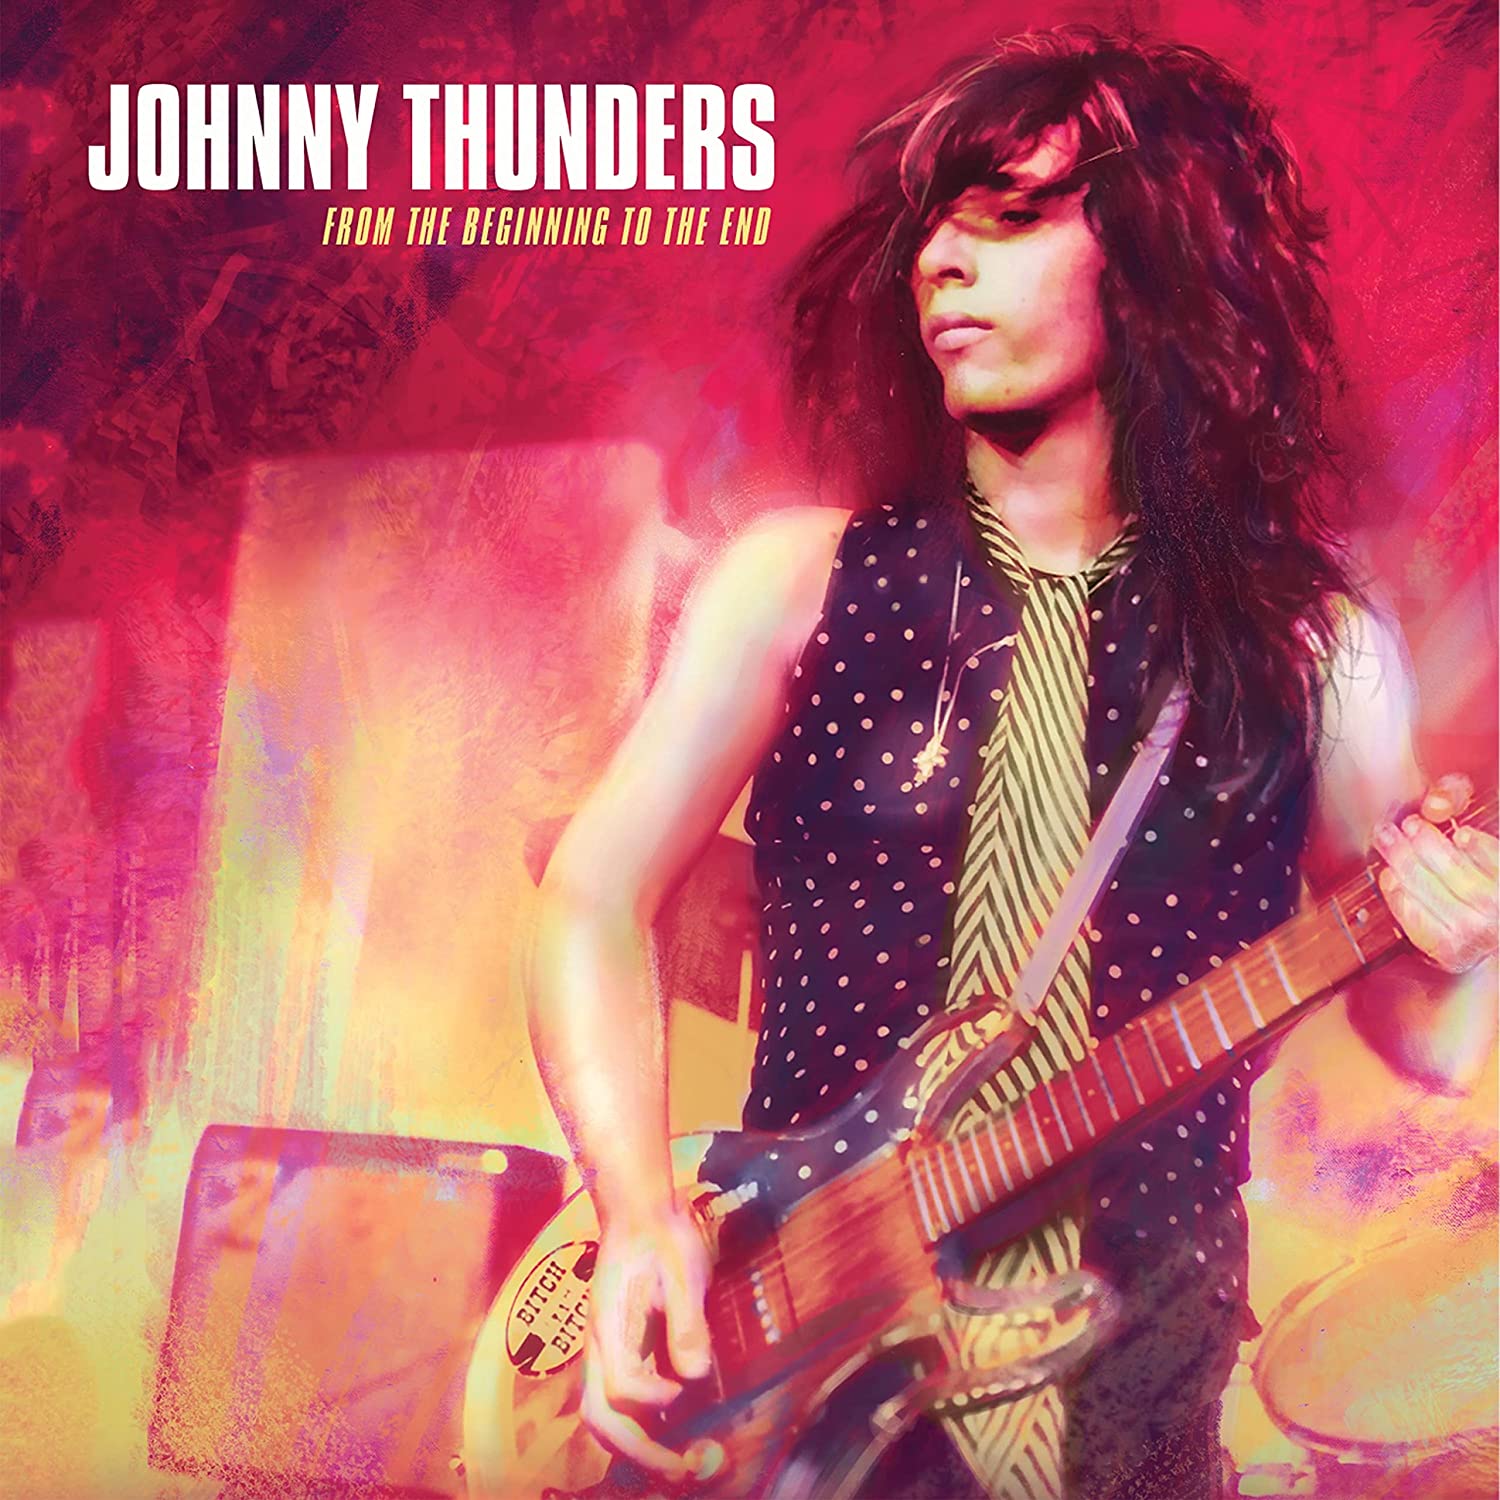 Johnny Thunders 3CD Collection – From The Beginning To The End